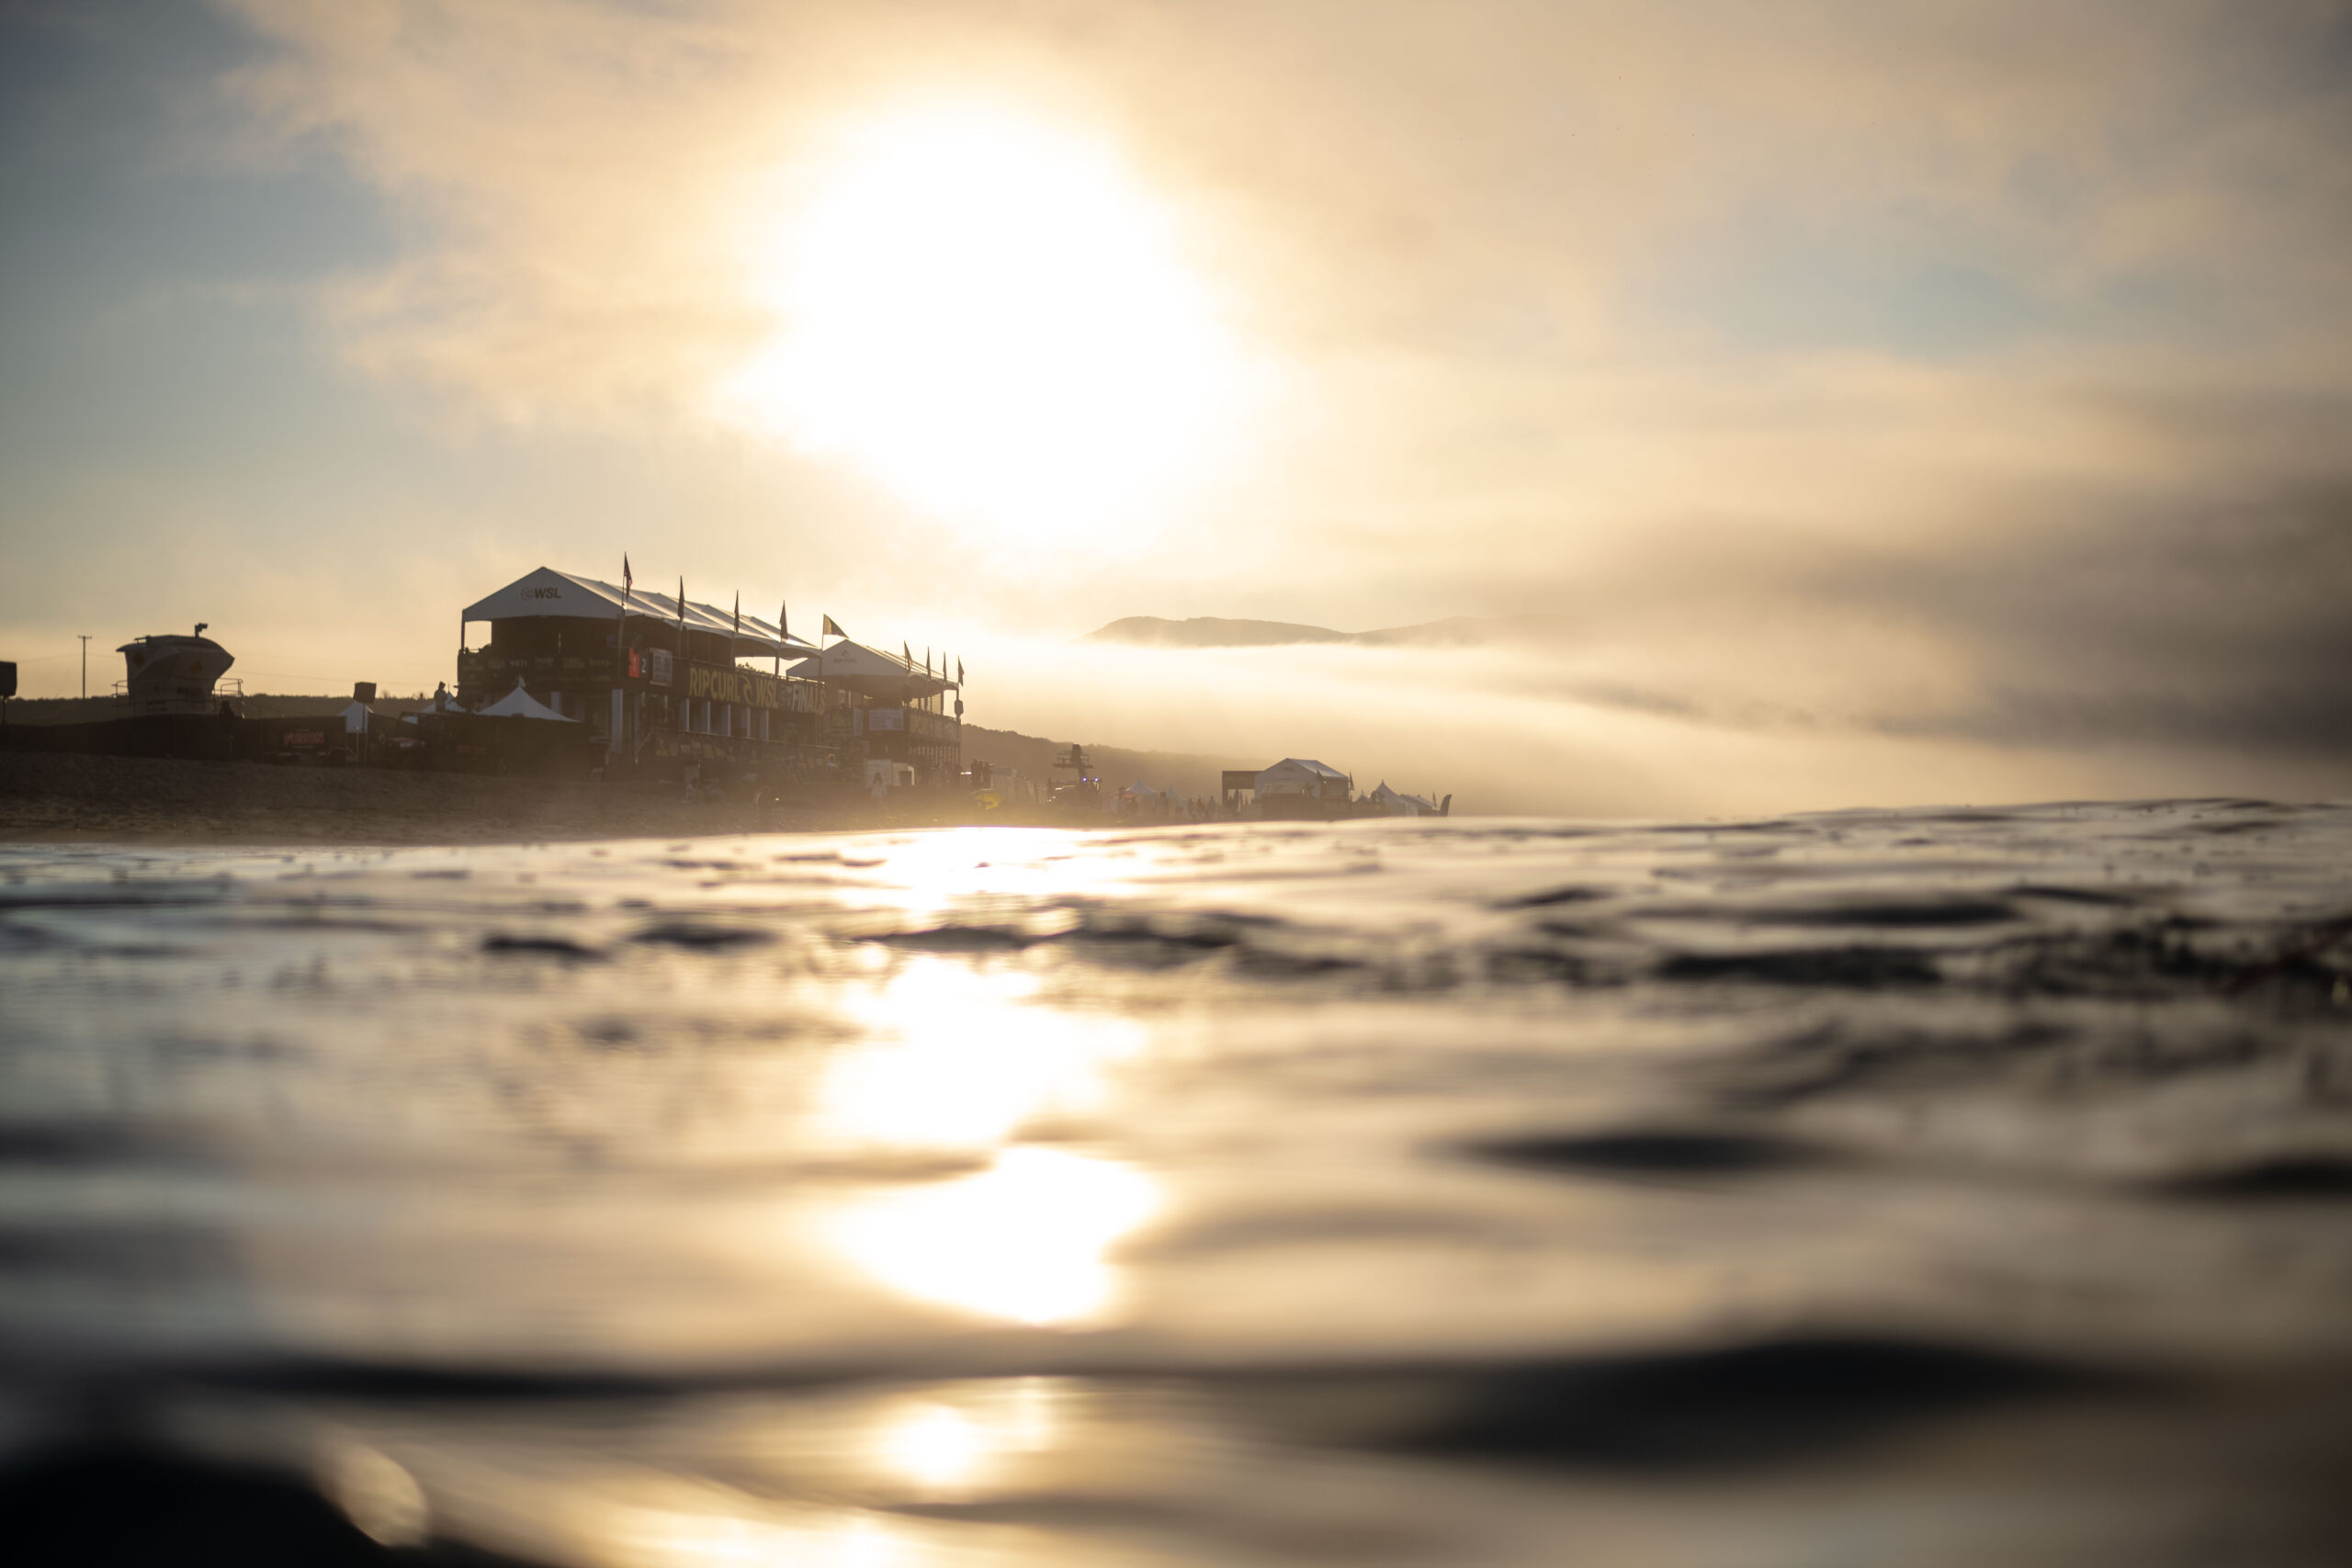 Water angle surf photography from Lower Trestle day one of the waiting period for the WSL final